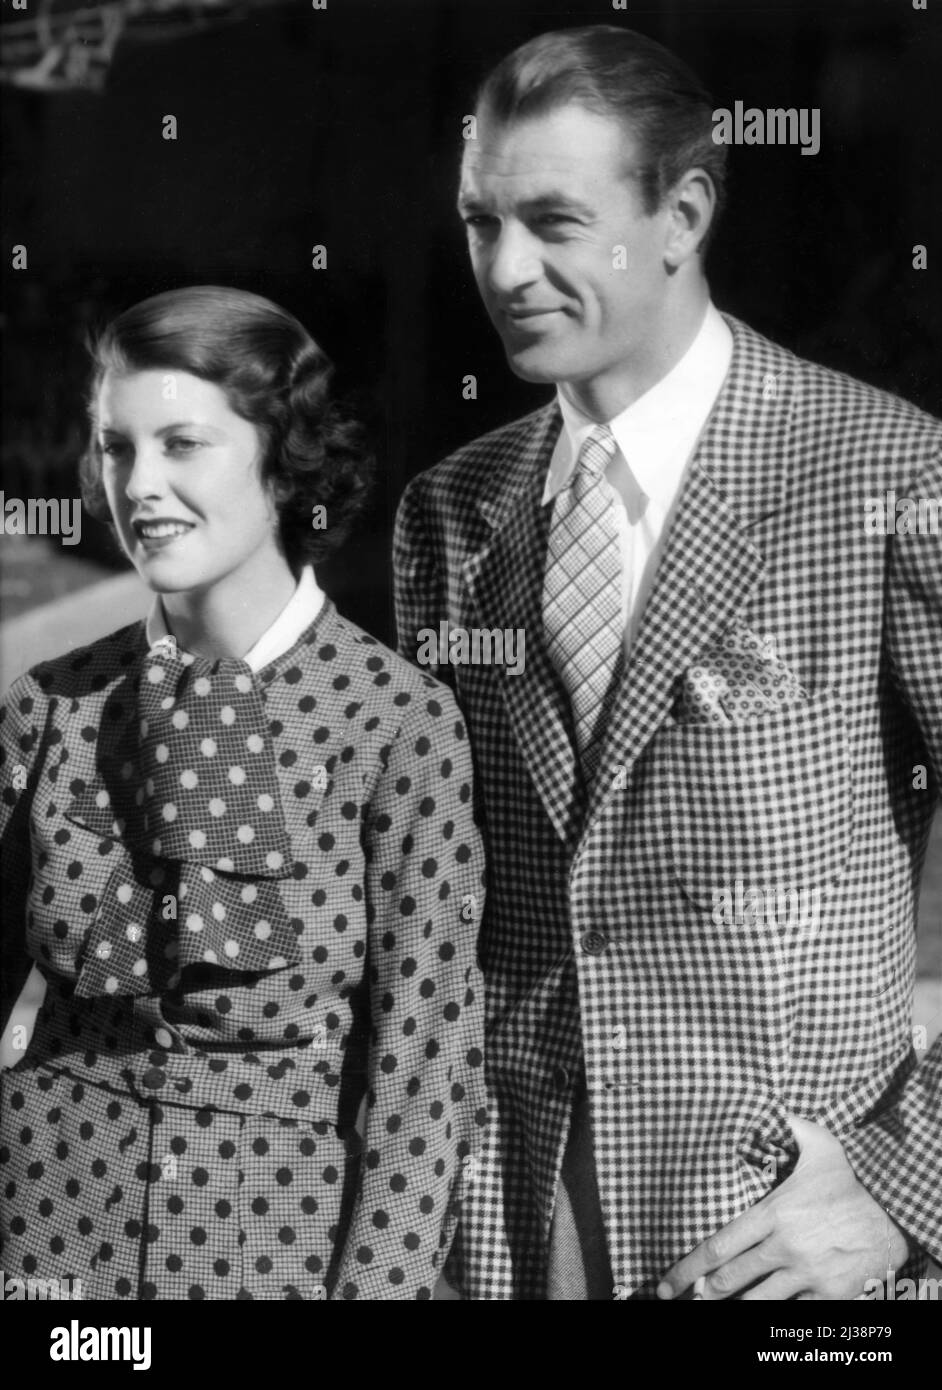 GARY COOPER and his Wife VERONICA BALFE aka SANDRA SHAW aka ROCKY COOPER 1935 candid portrait by RAY JONES publicity for Paramount Pictures Stock Photo